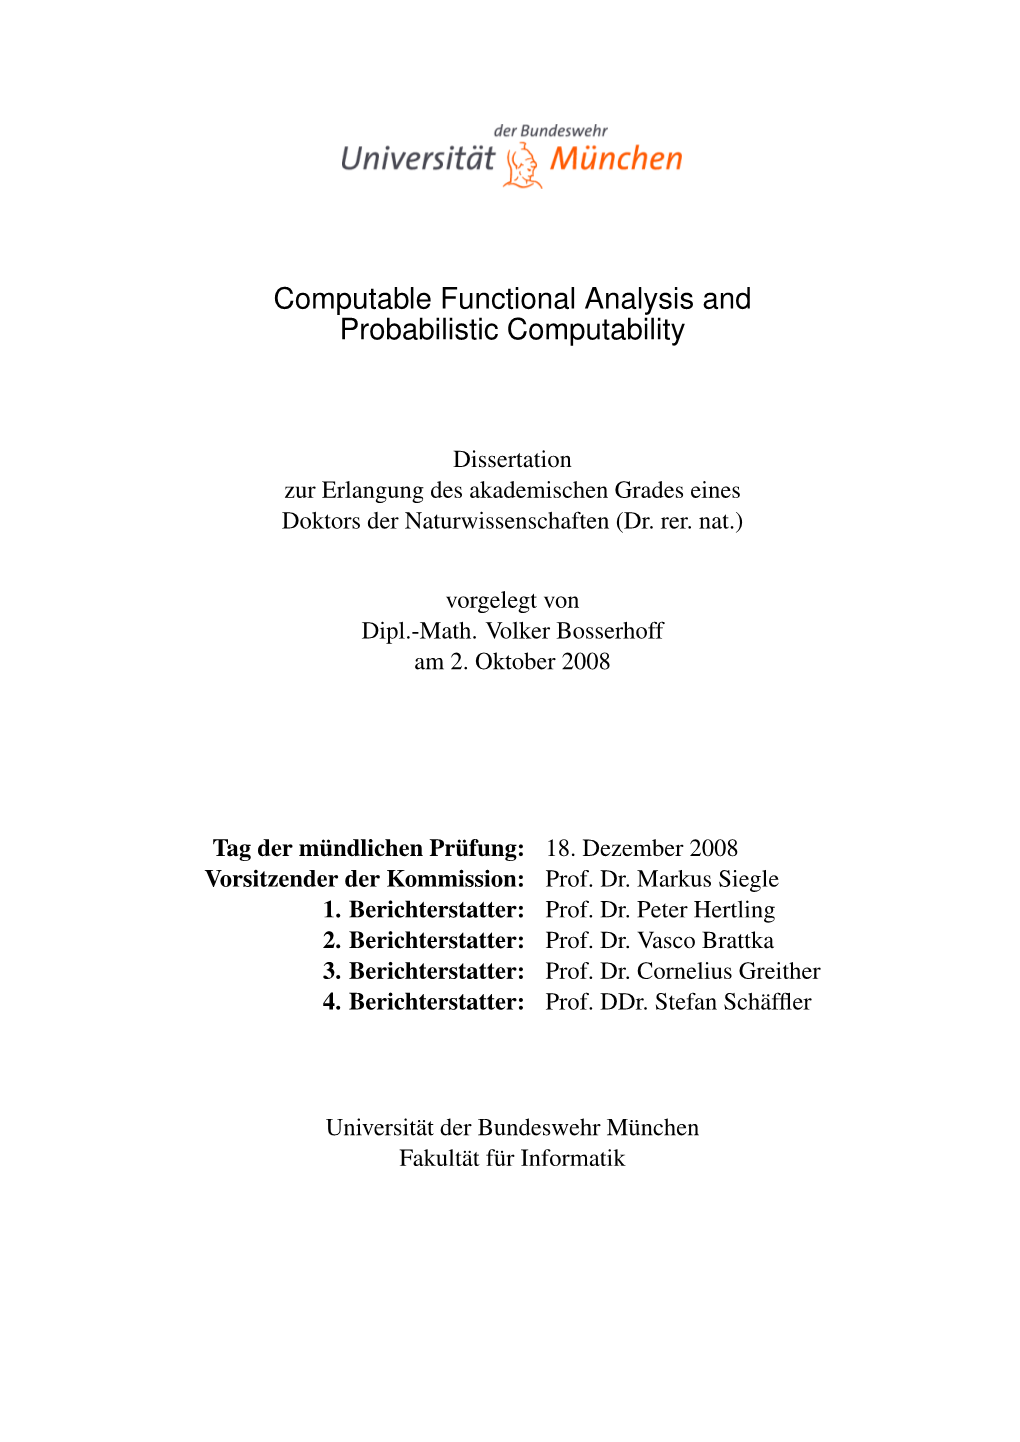 Computable Functional Analysis and Probabilistic Computation with Applications to Numerical Analysis